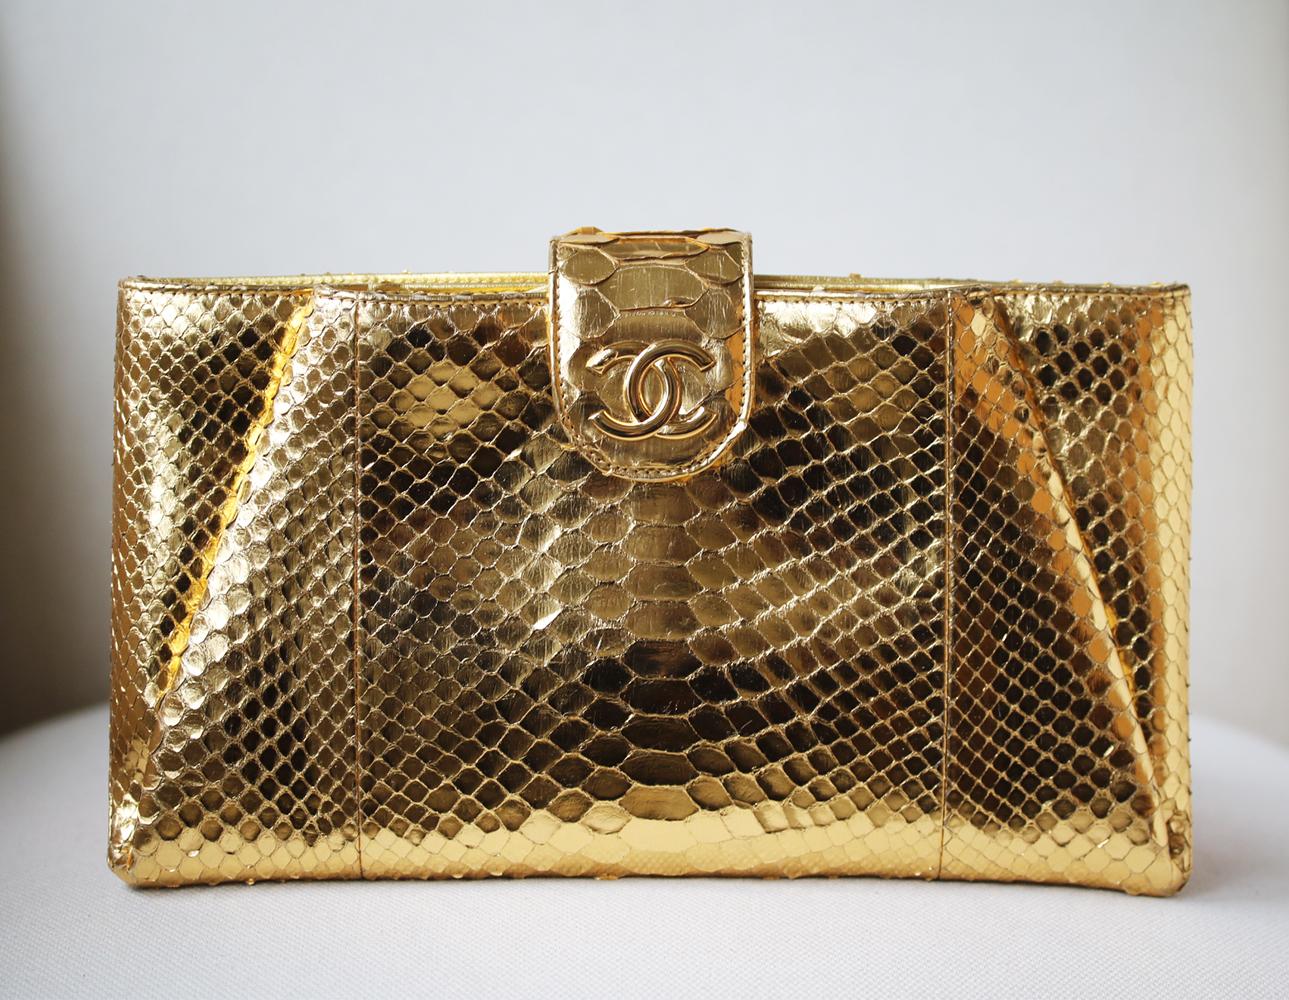 Chanel Metallic Python Clutch. Features metallic-gold python-skin. Gold CC hardware, and metallic-gold leather lining. Two top zip compartments. Zip interior pocket and a flat interior pocket. Made in Italy. Does not come with a dustbag or box.